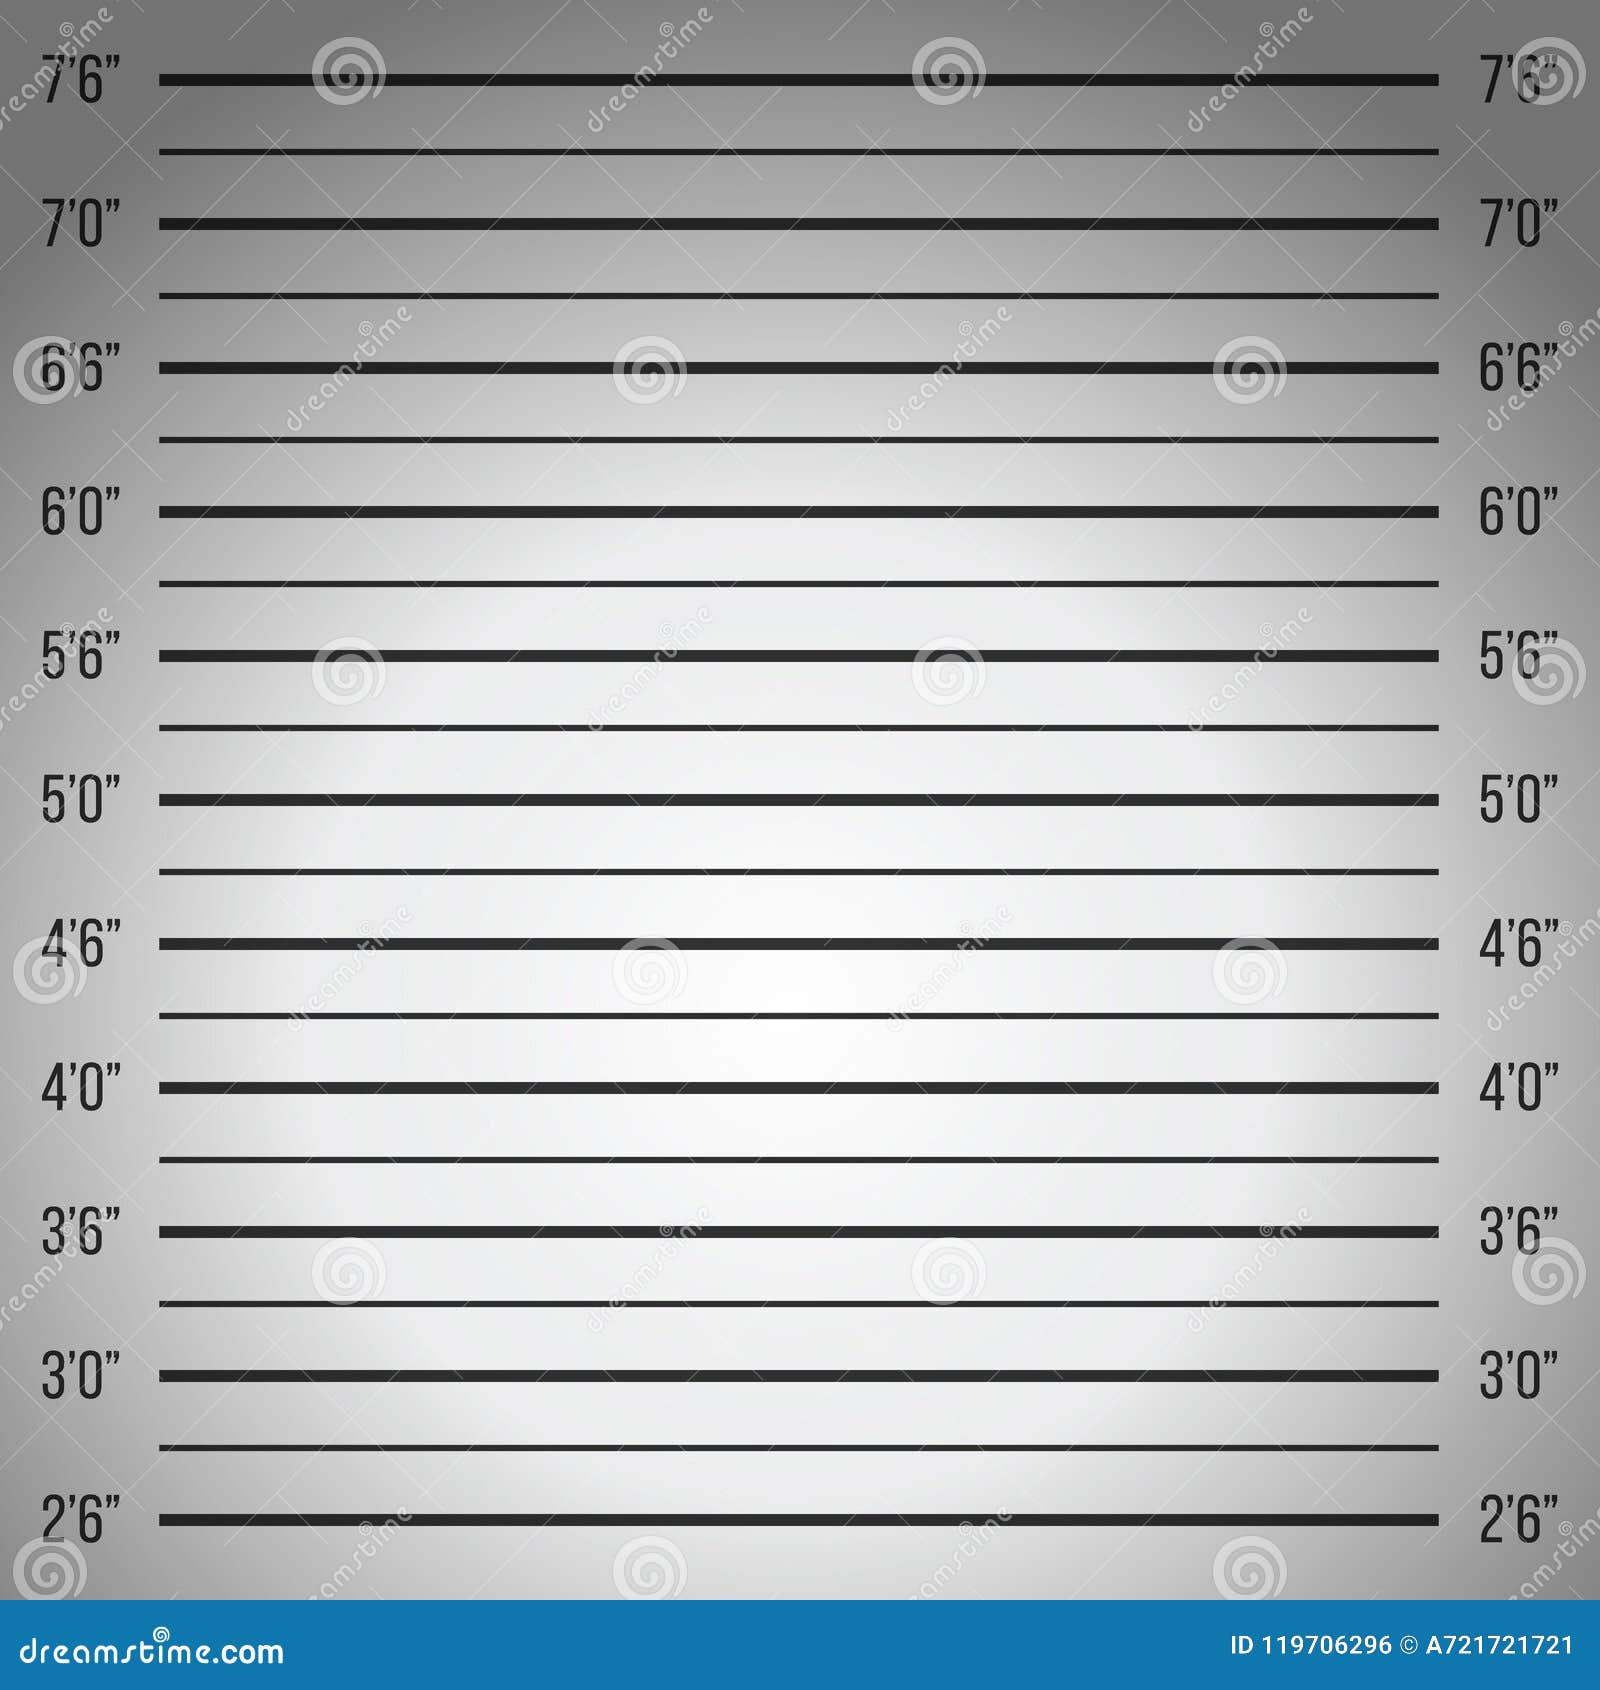 creative-vector-illustration-of-police-lineup-mugshot-template-with-a